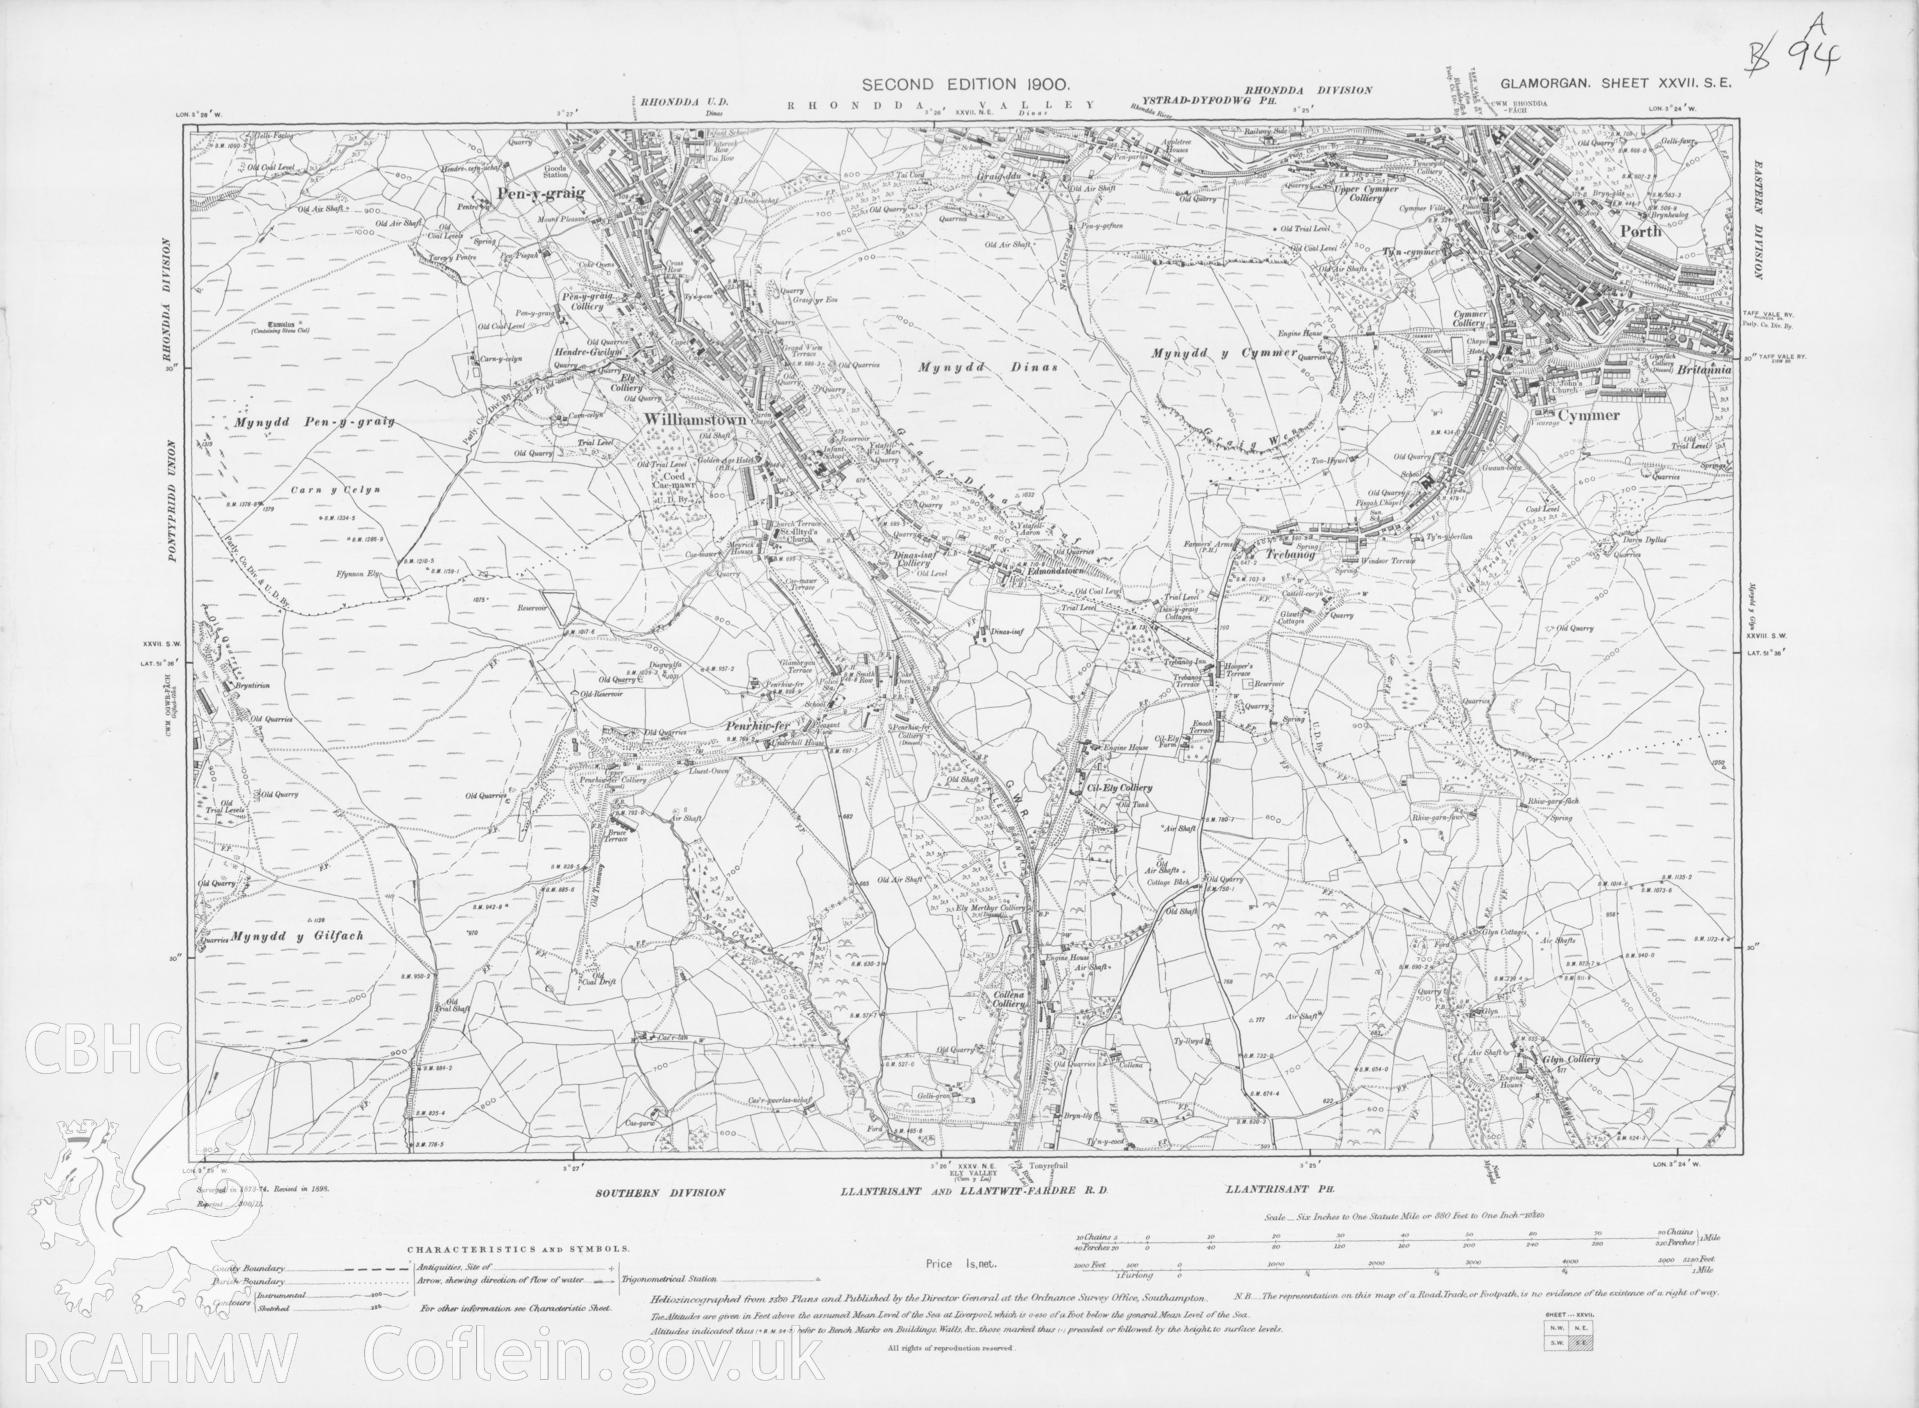 Second Edition 1900 Ordnance Survey map, covering  the Williamstown area.